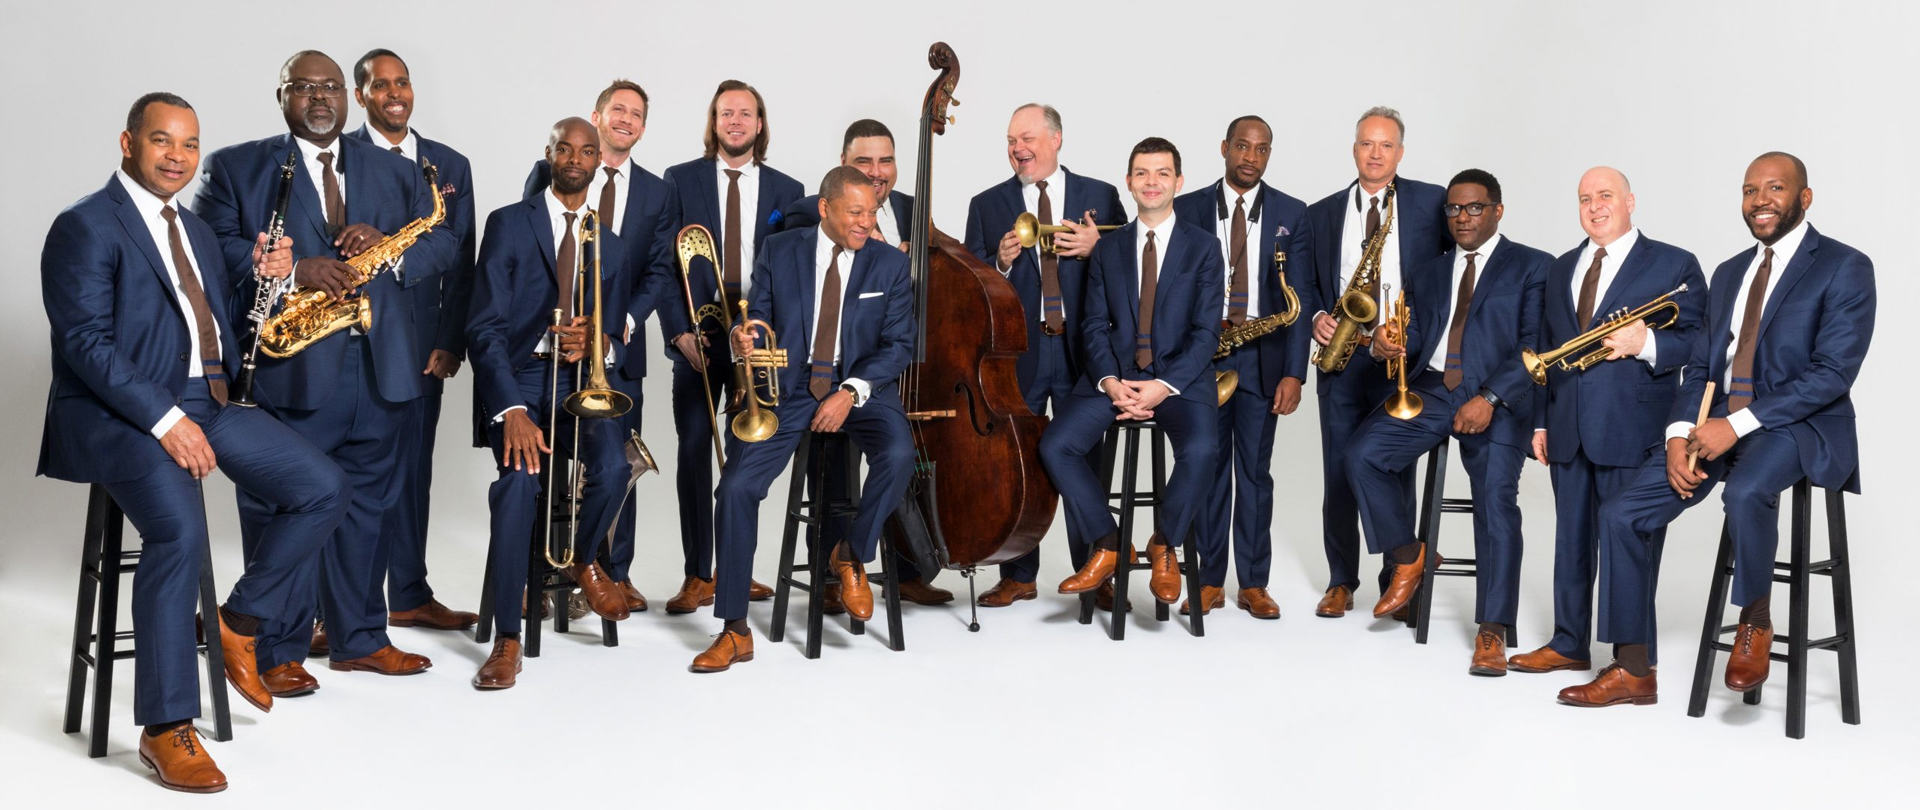 Group photograph of the entire Jazz at Lincoln Center Orchestra, with Wynton Marsalis in foreground